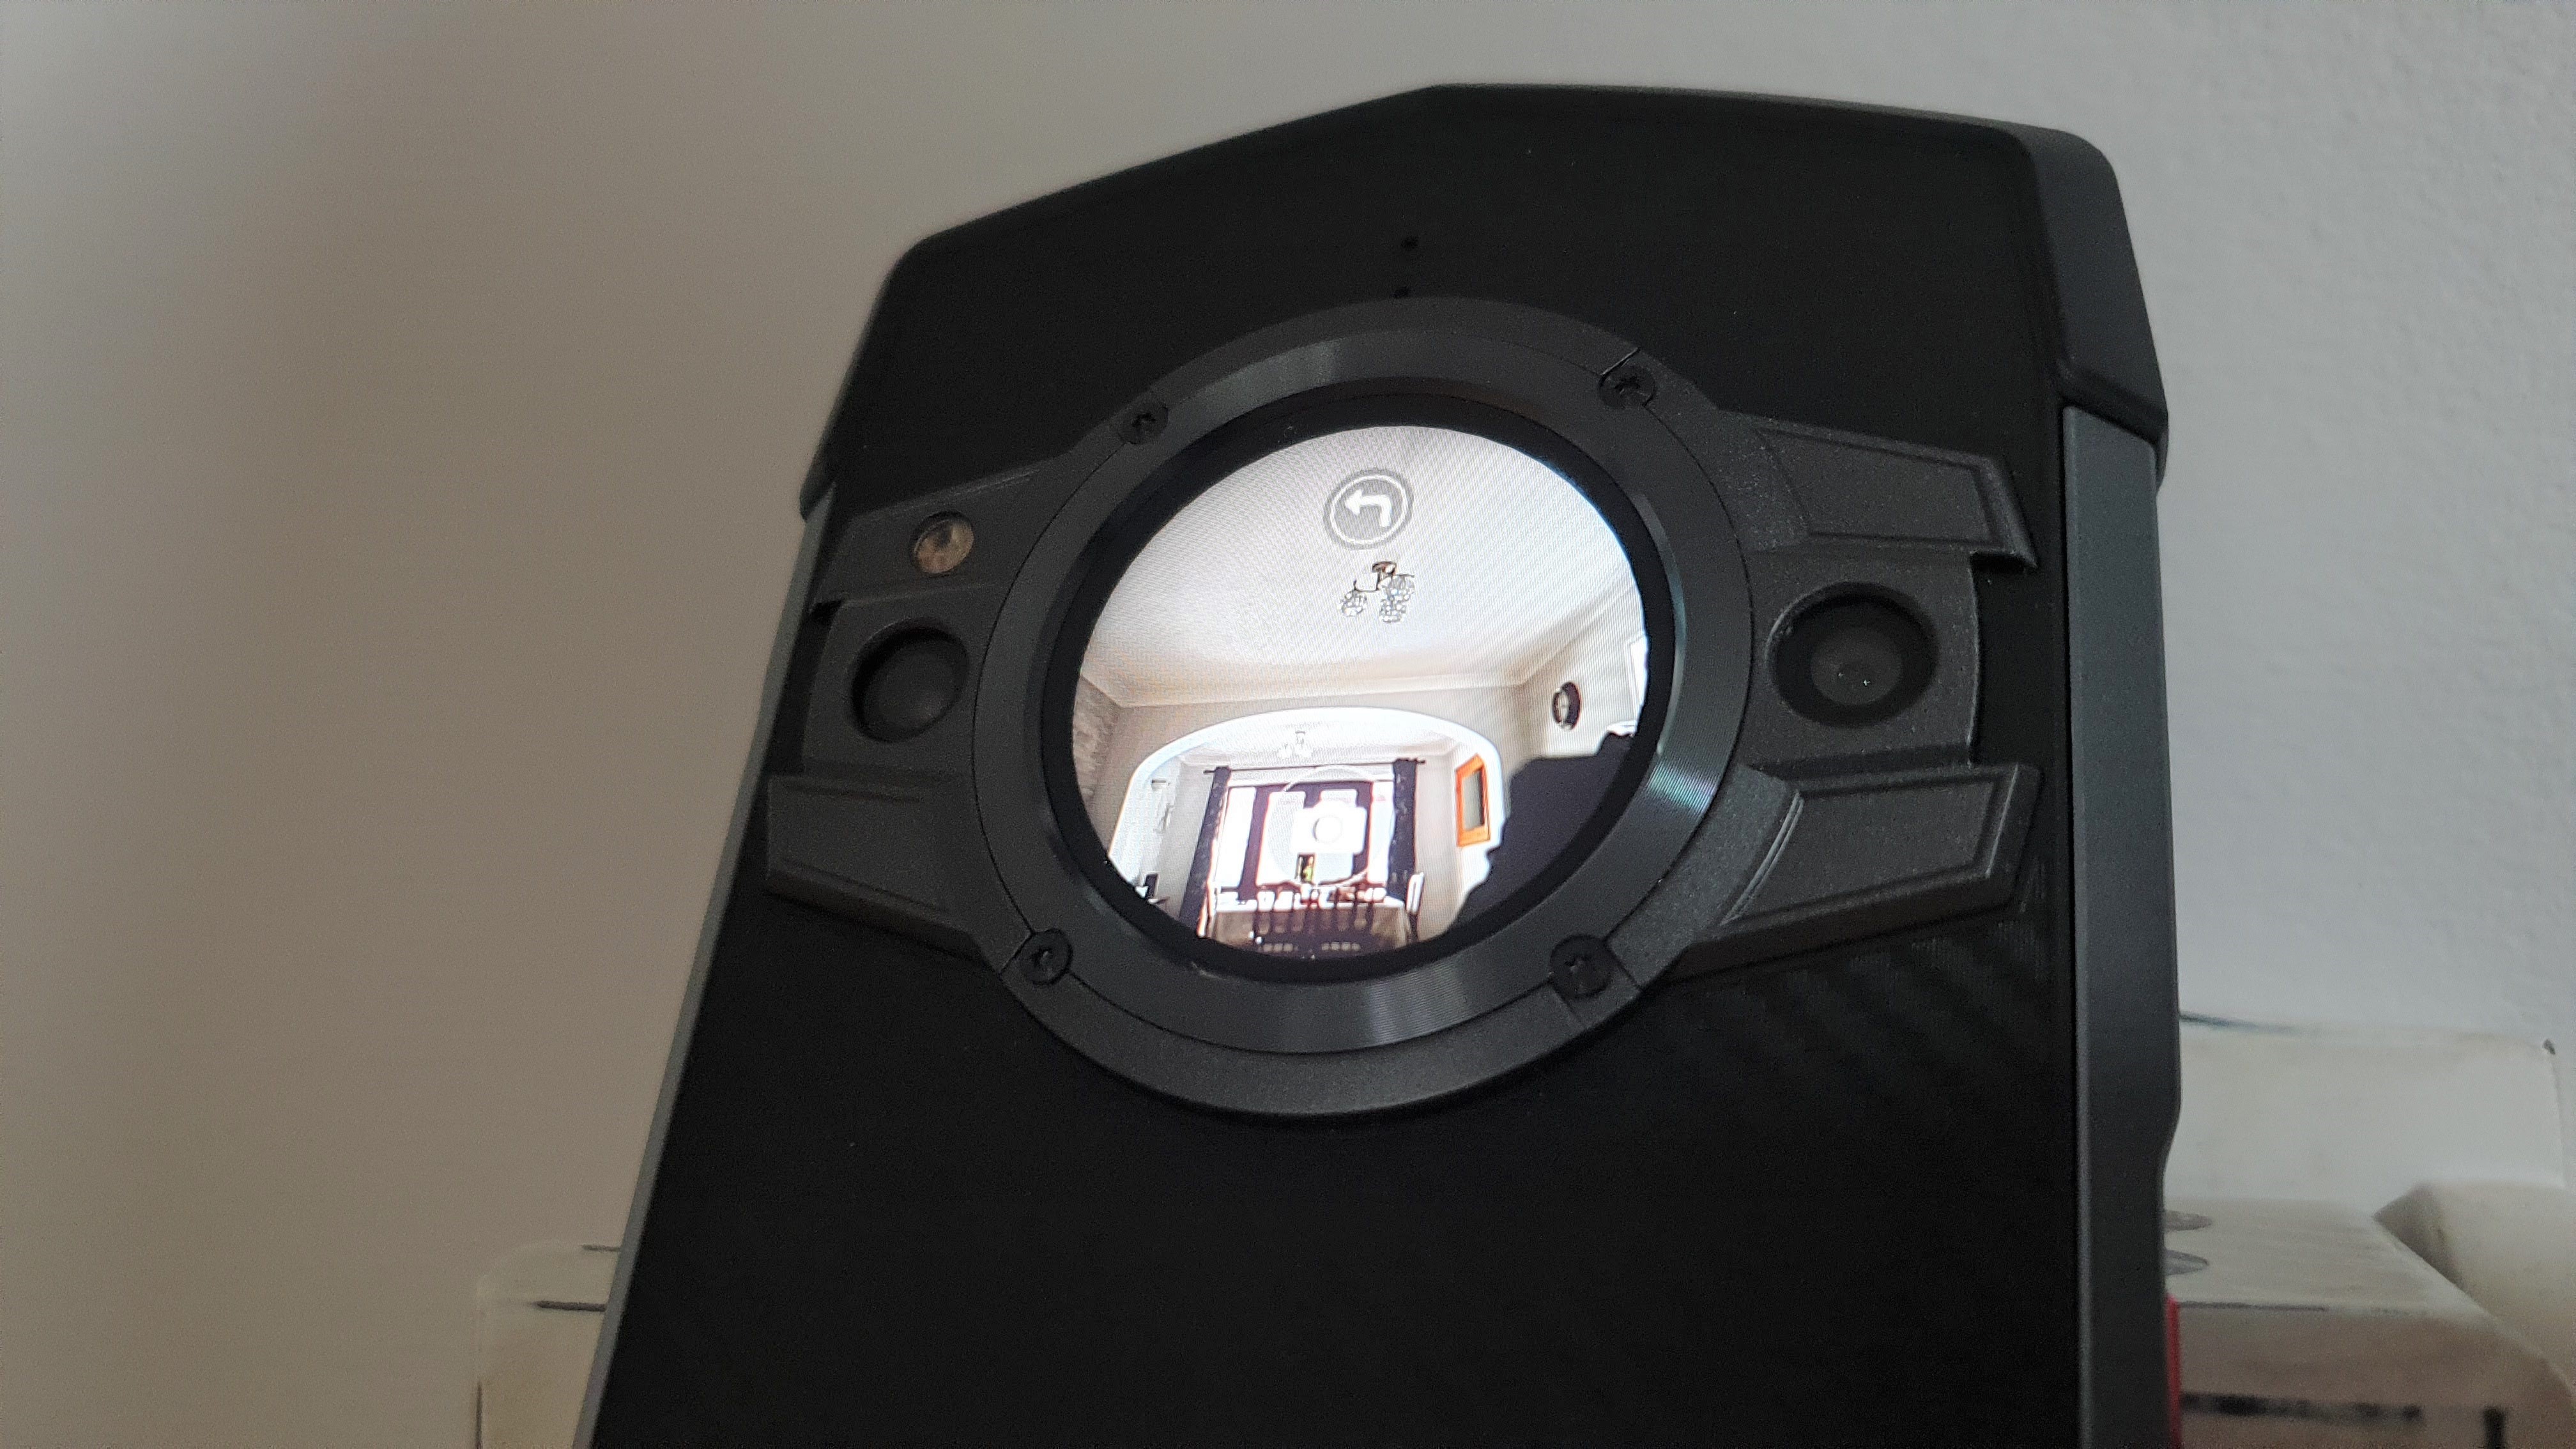 Secondary Display as Viewfinder